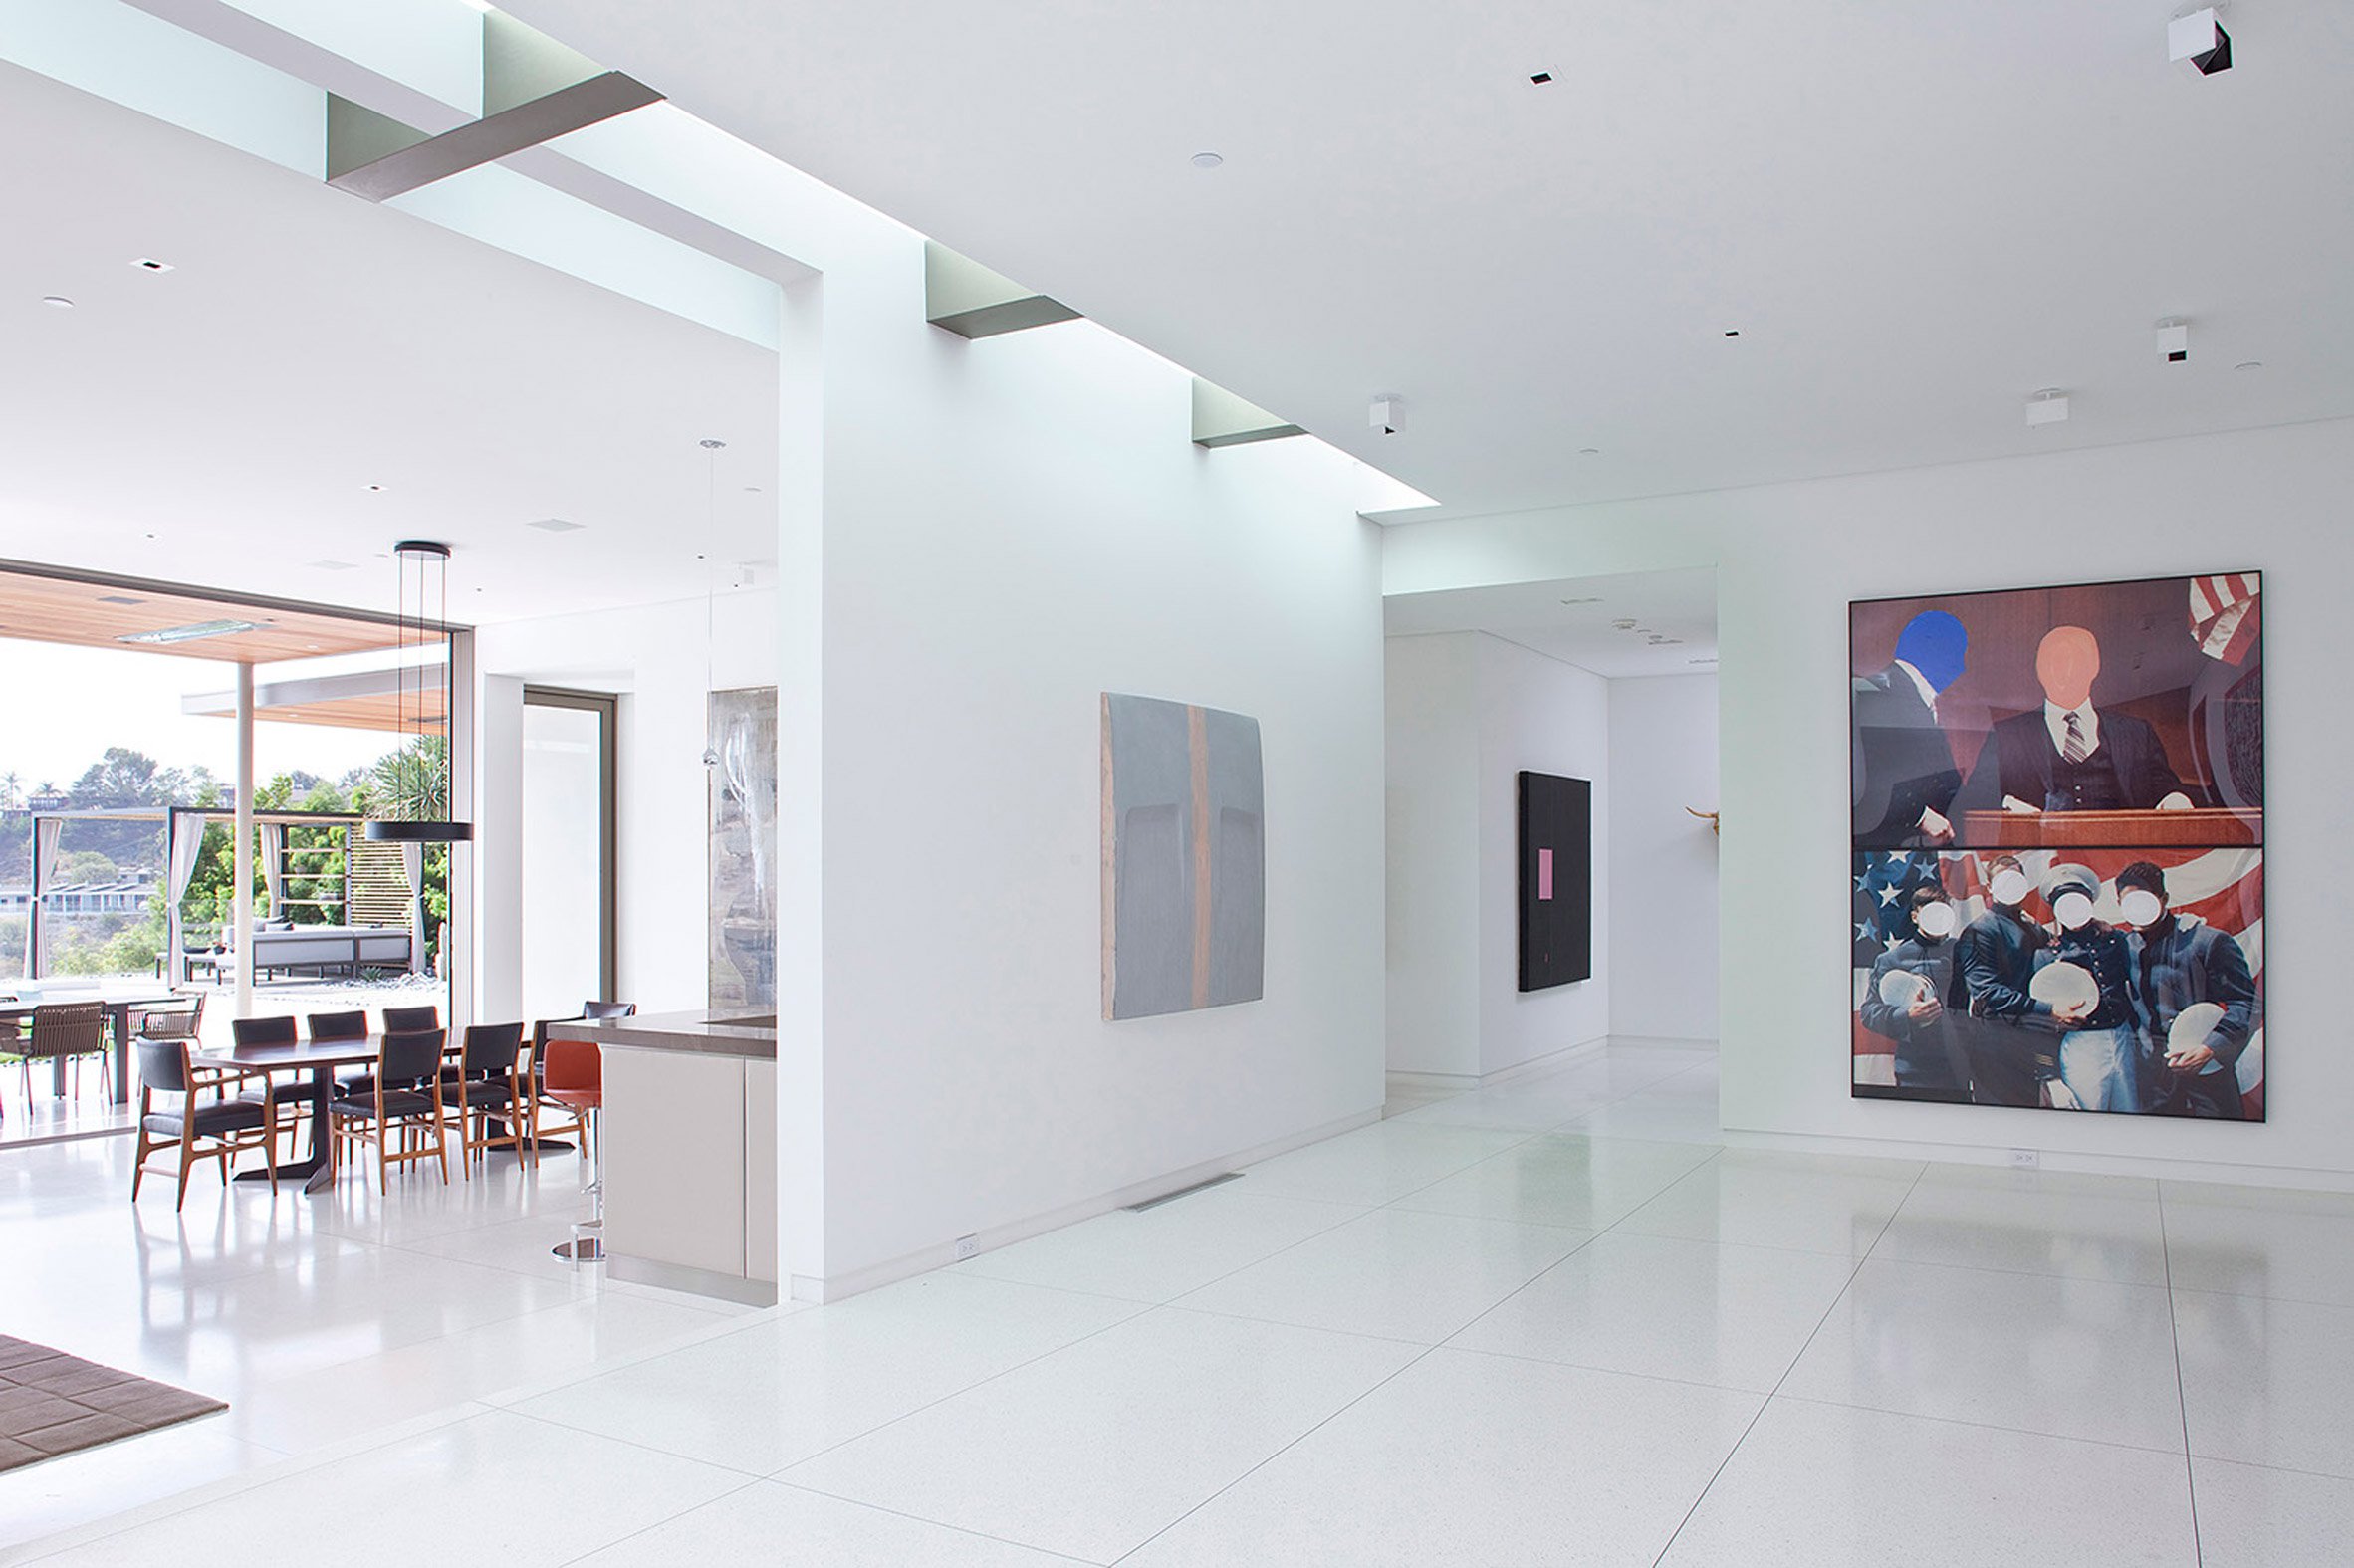 The interior spaces are done in white to feature a perfect backdrop for the owner's art collection and a simple material palette is characteristic of modernist style